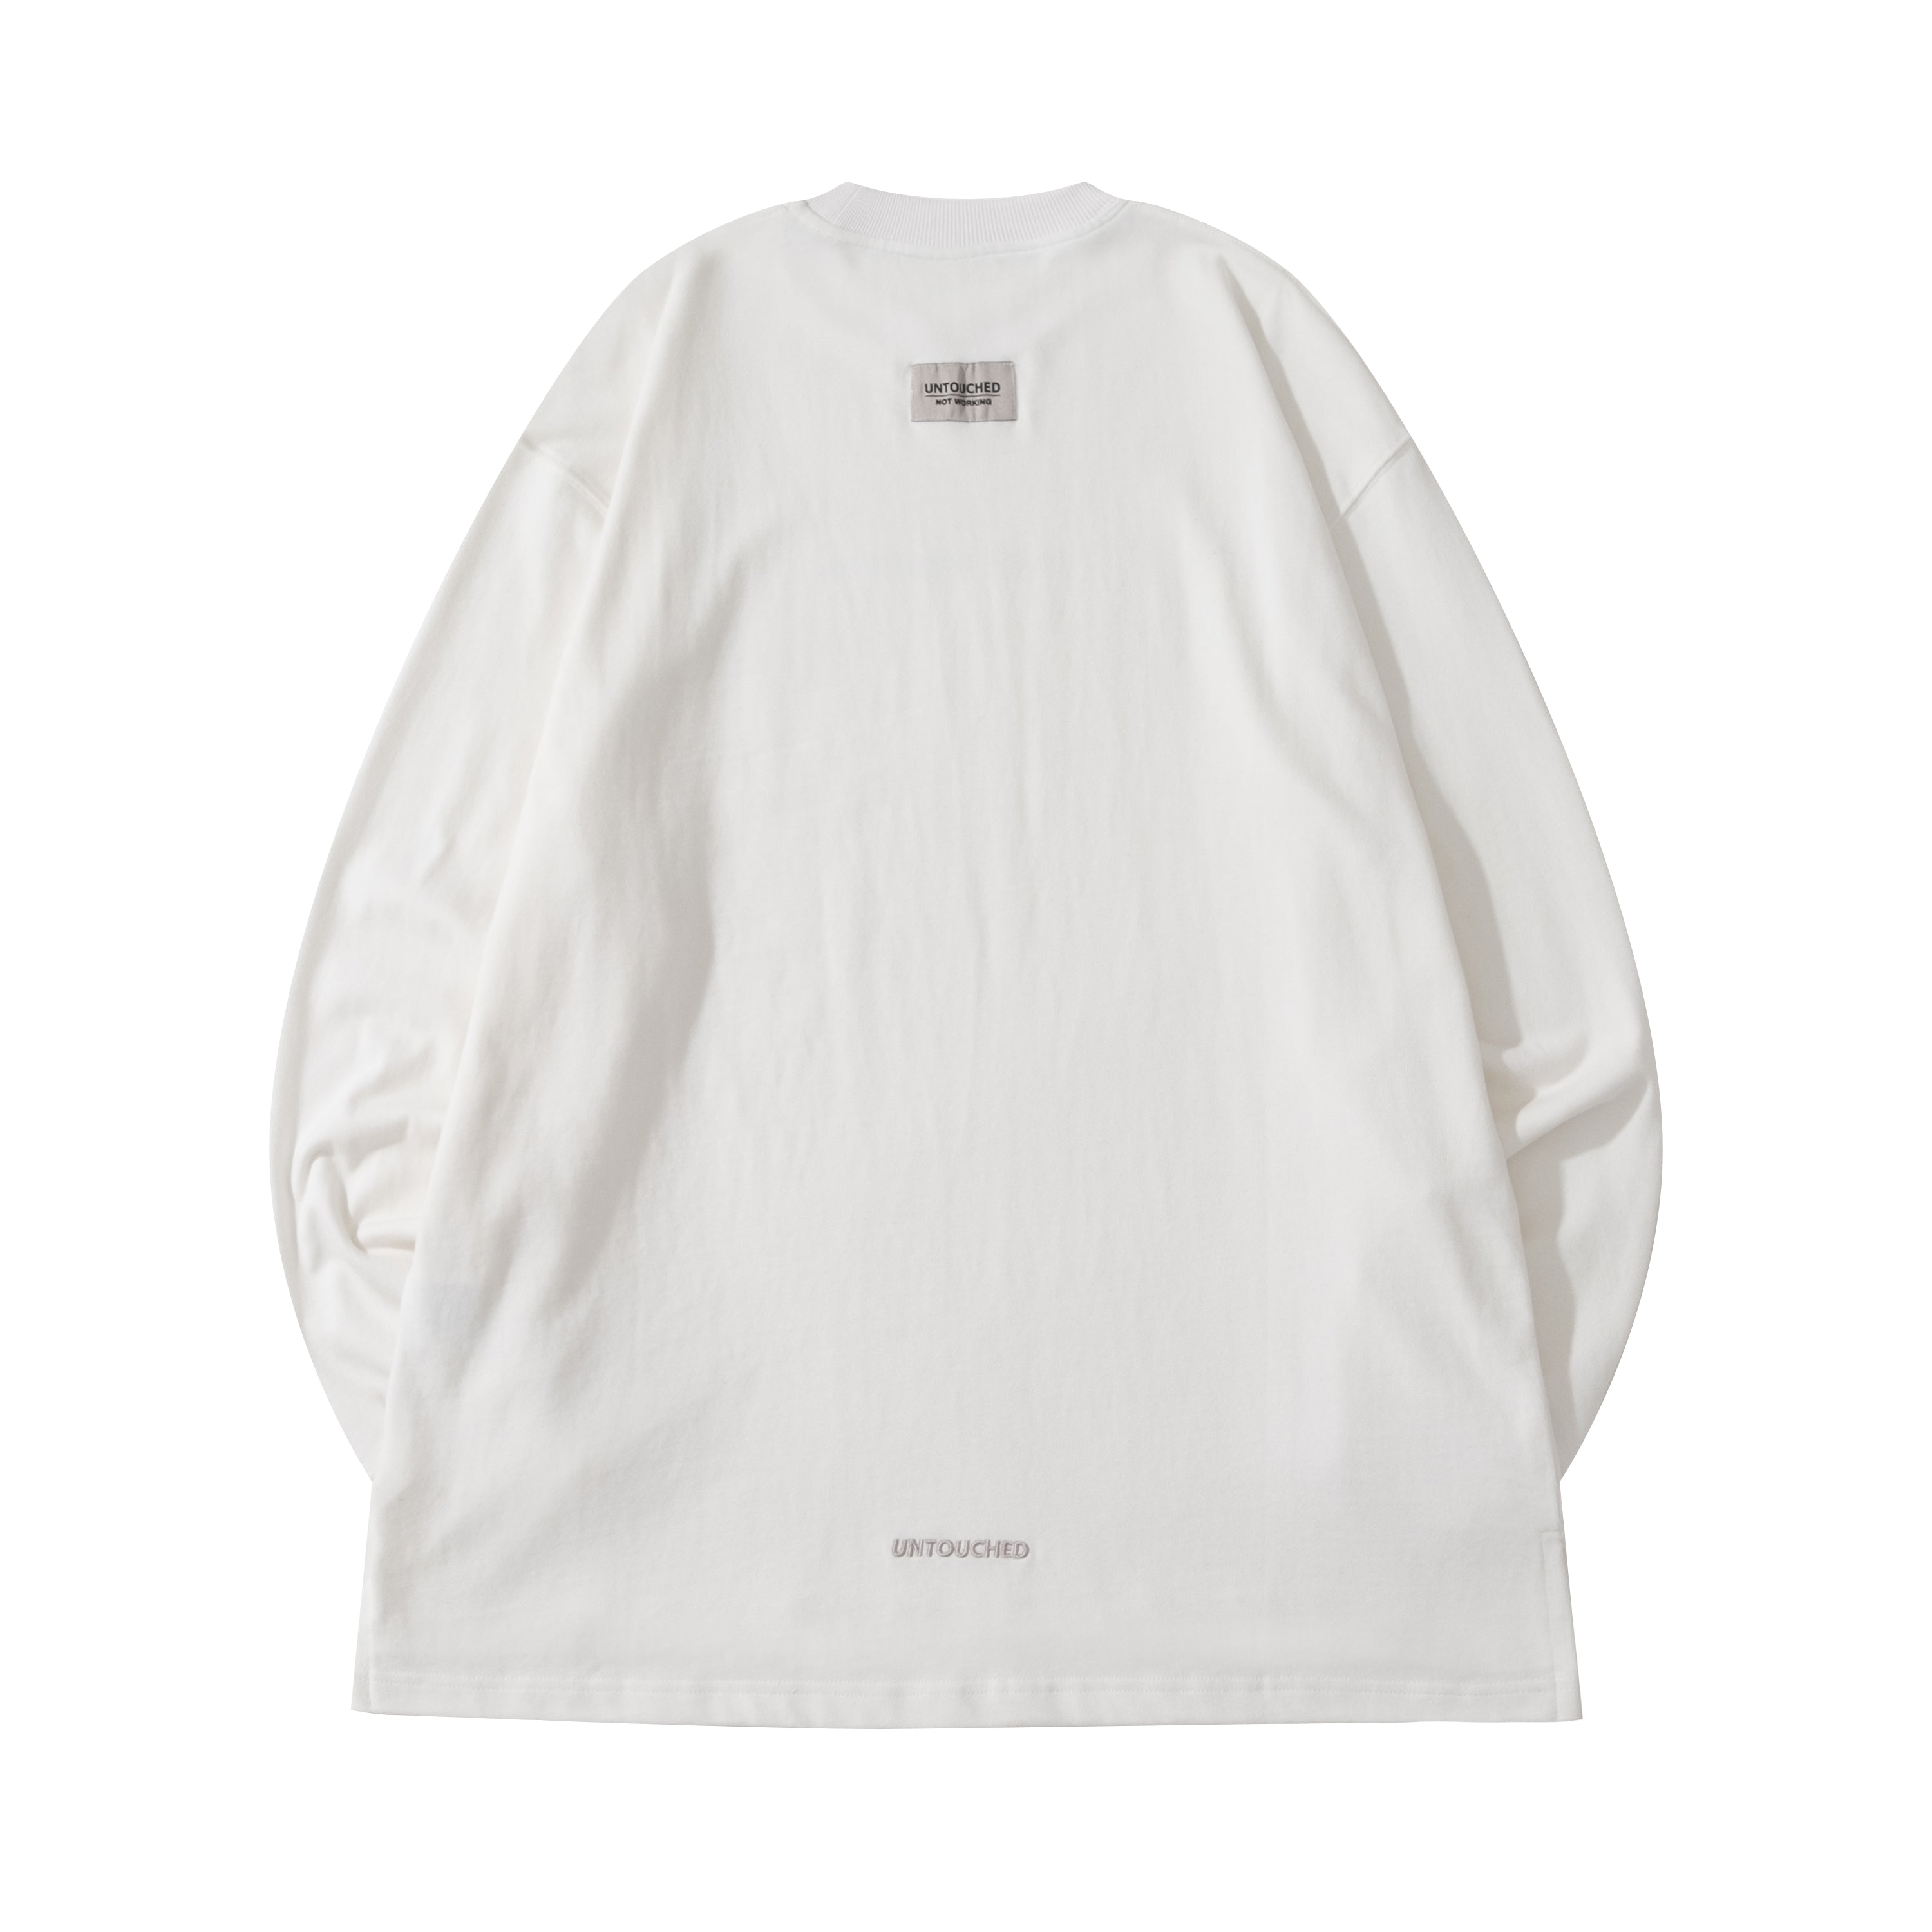 NW213WH | ABCDEFUCKOFF LONG TEE | NOT WORKING IV